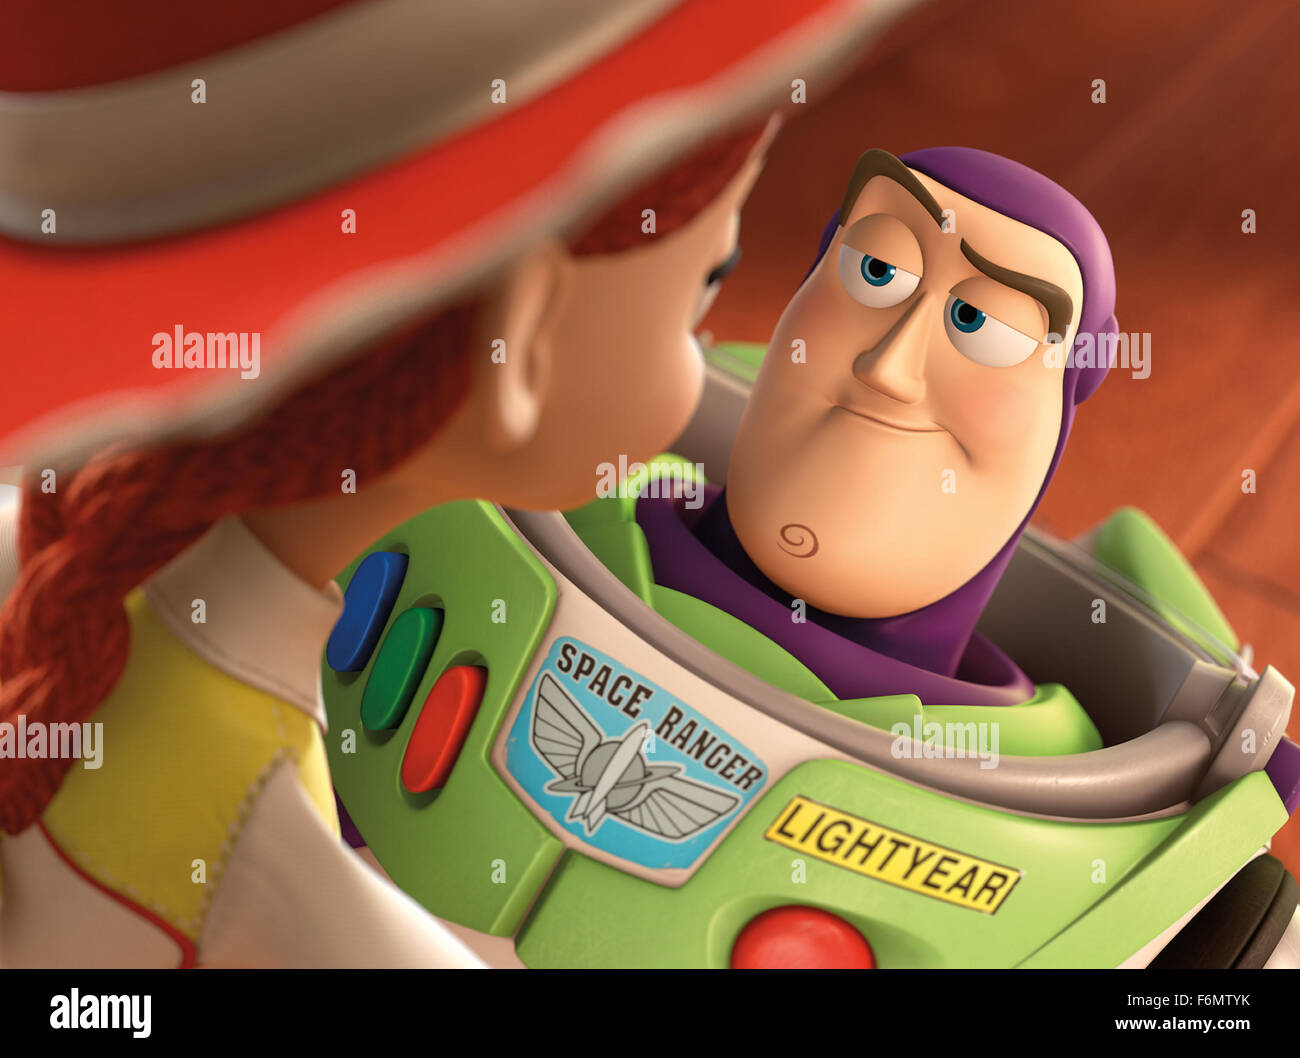 Who is jessie dating in toy story